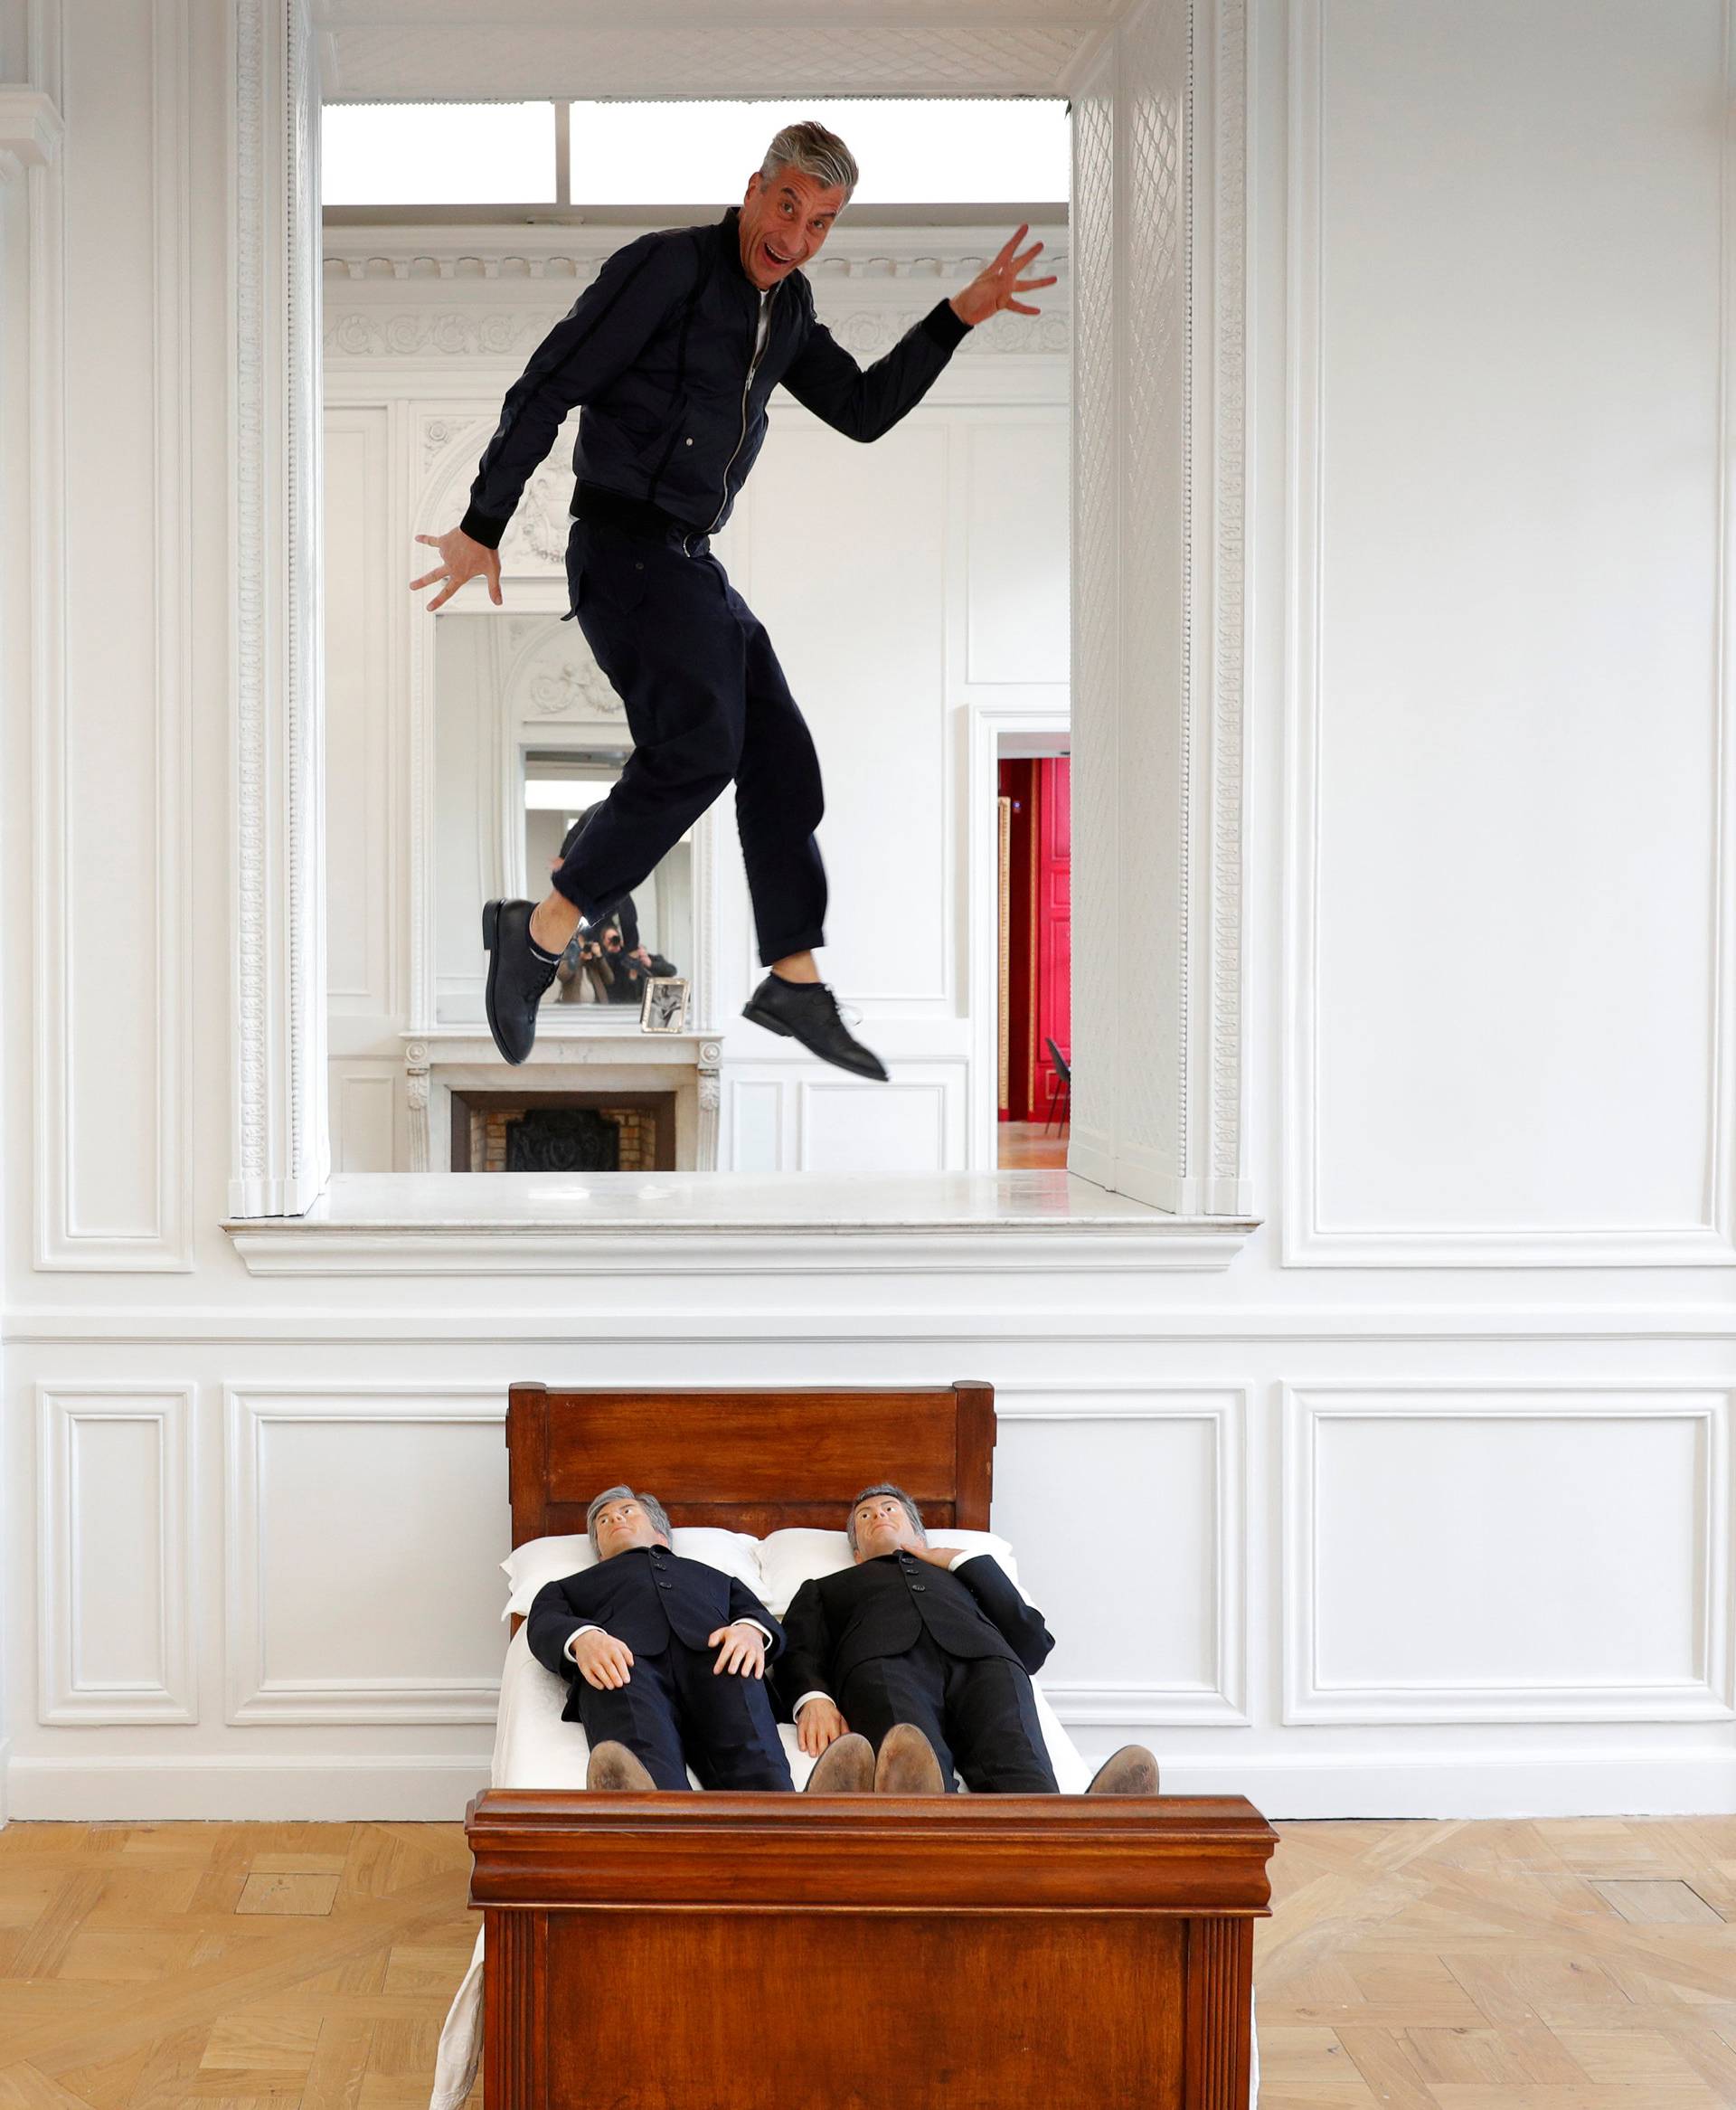 Italian artist Maurizio Cattelan poses with his creation "Is There Life Before Death" in Paris